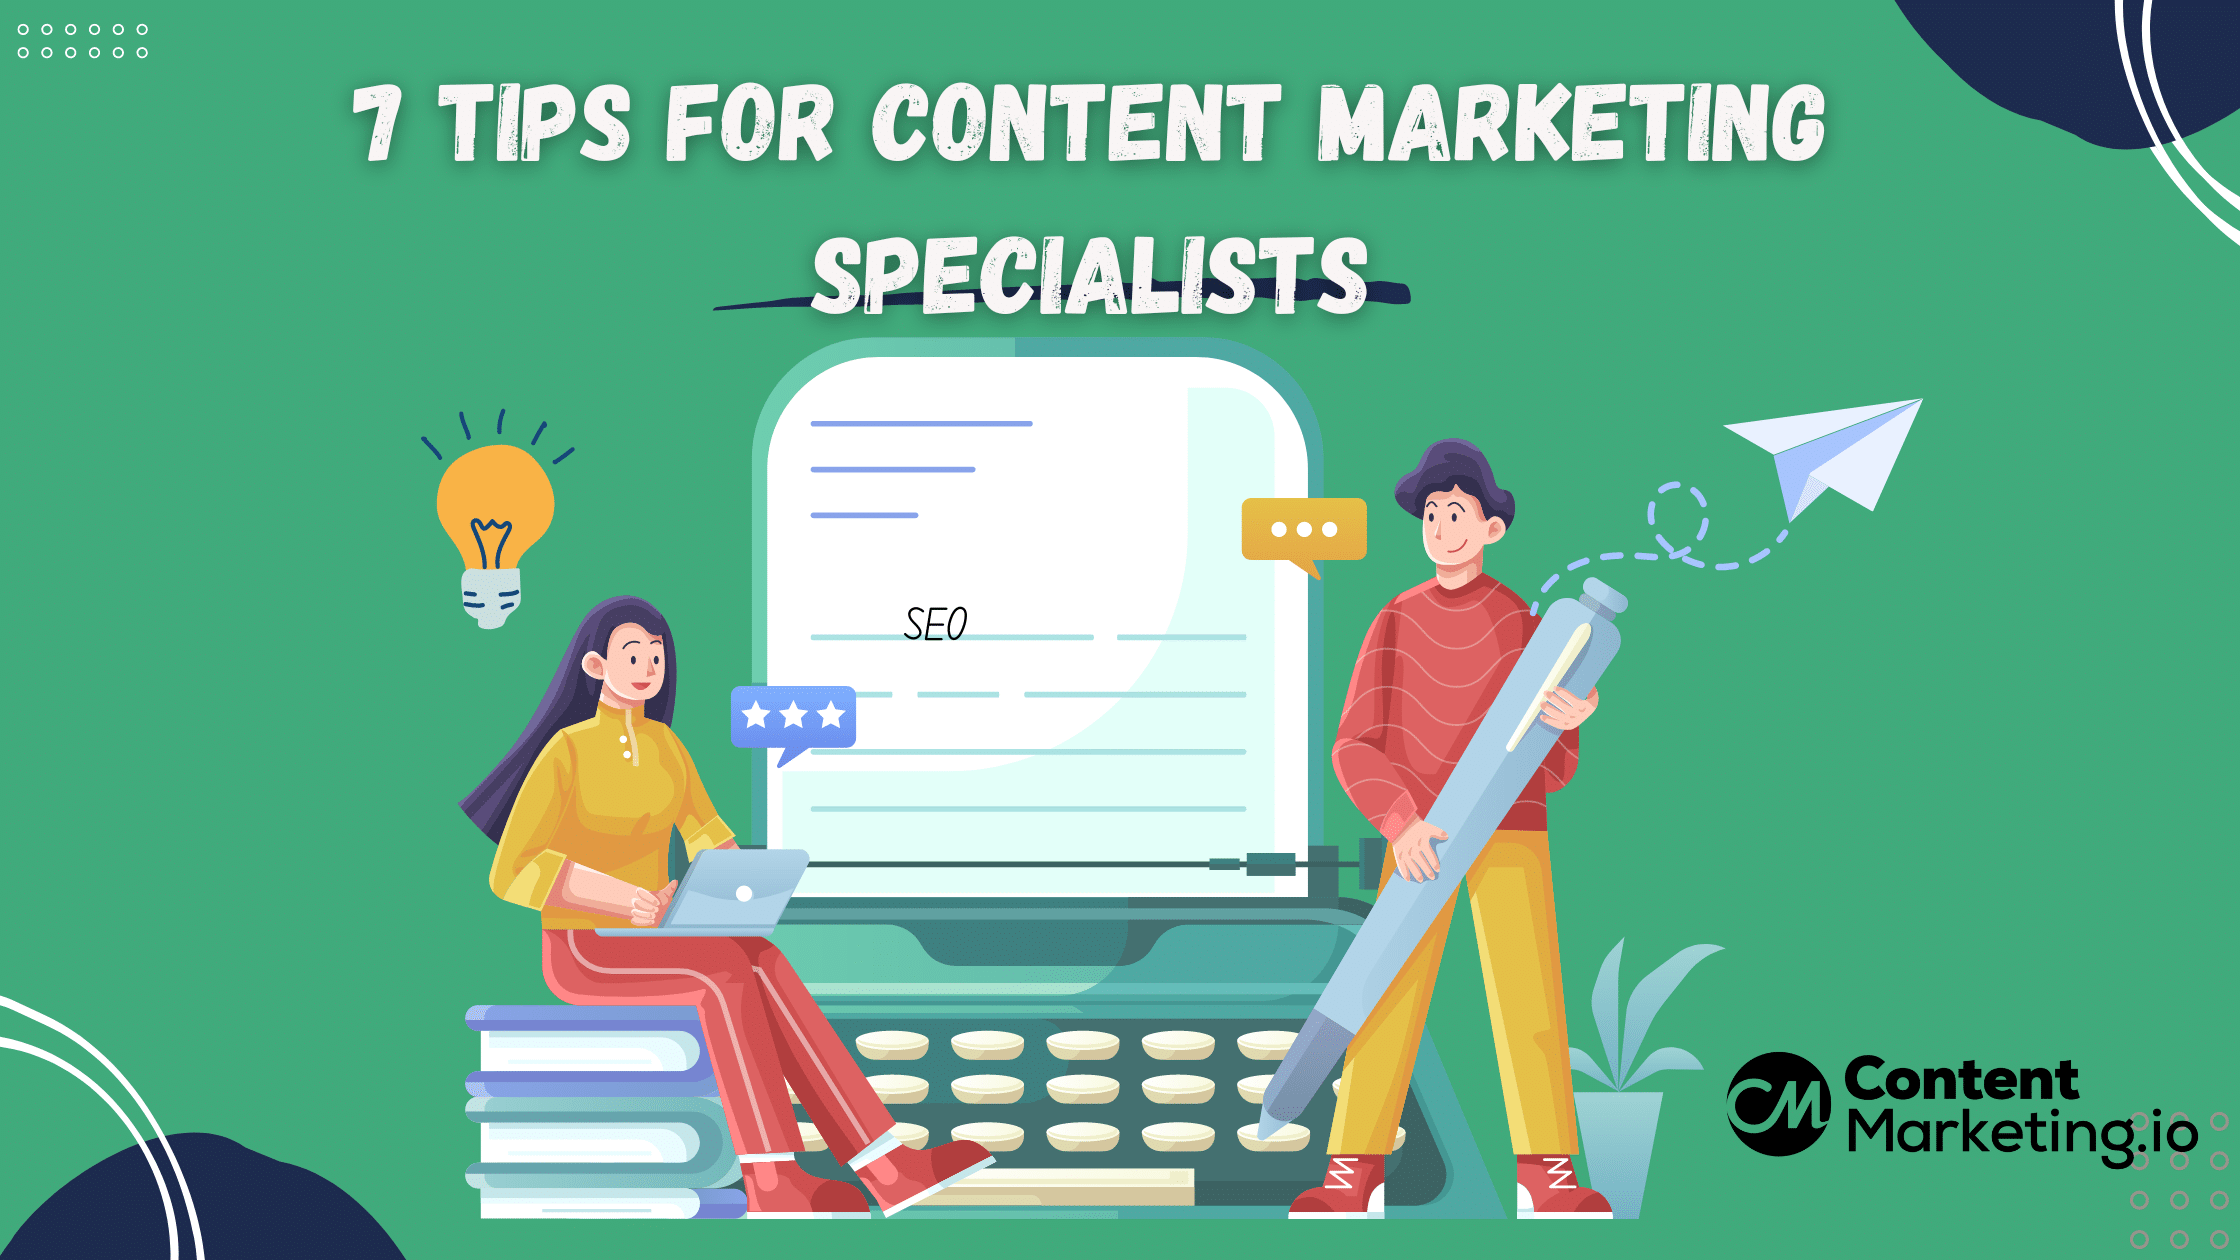 7 Tips for Content Marketing Specialists (3)